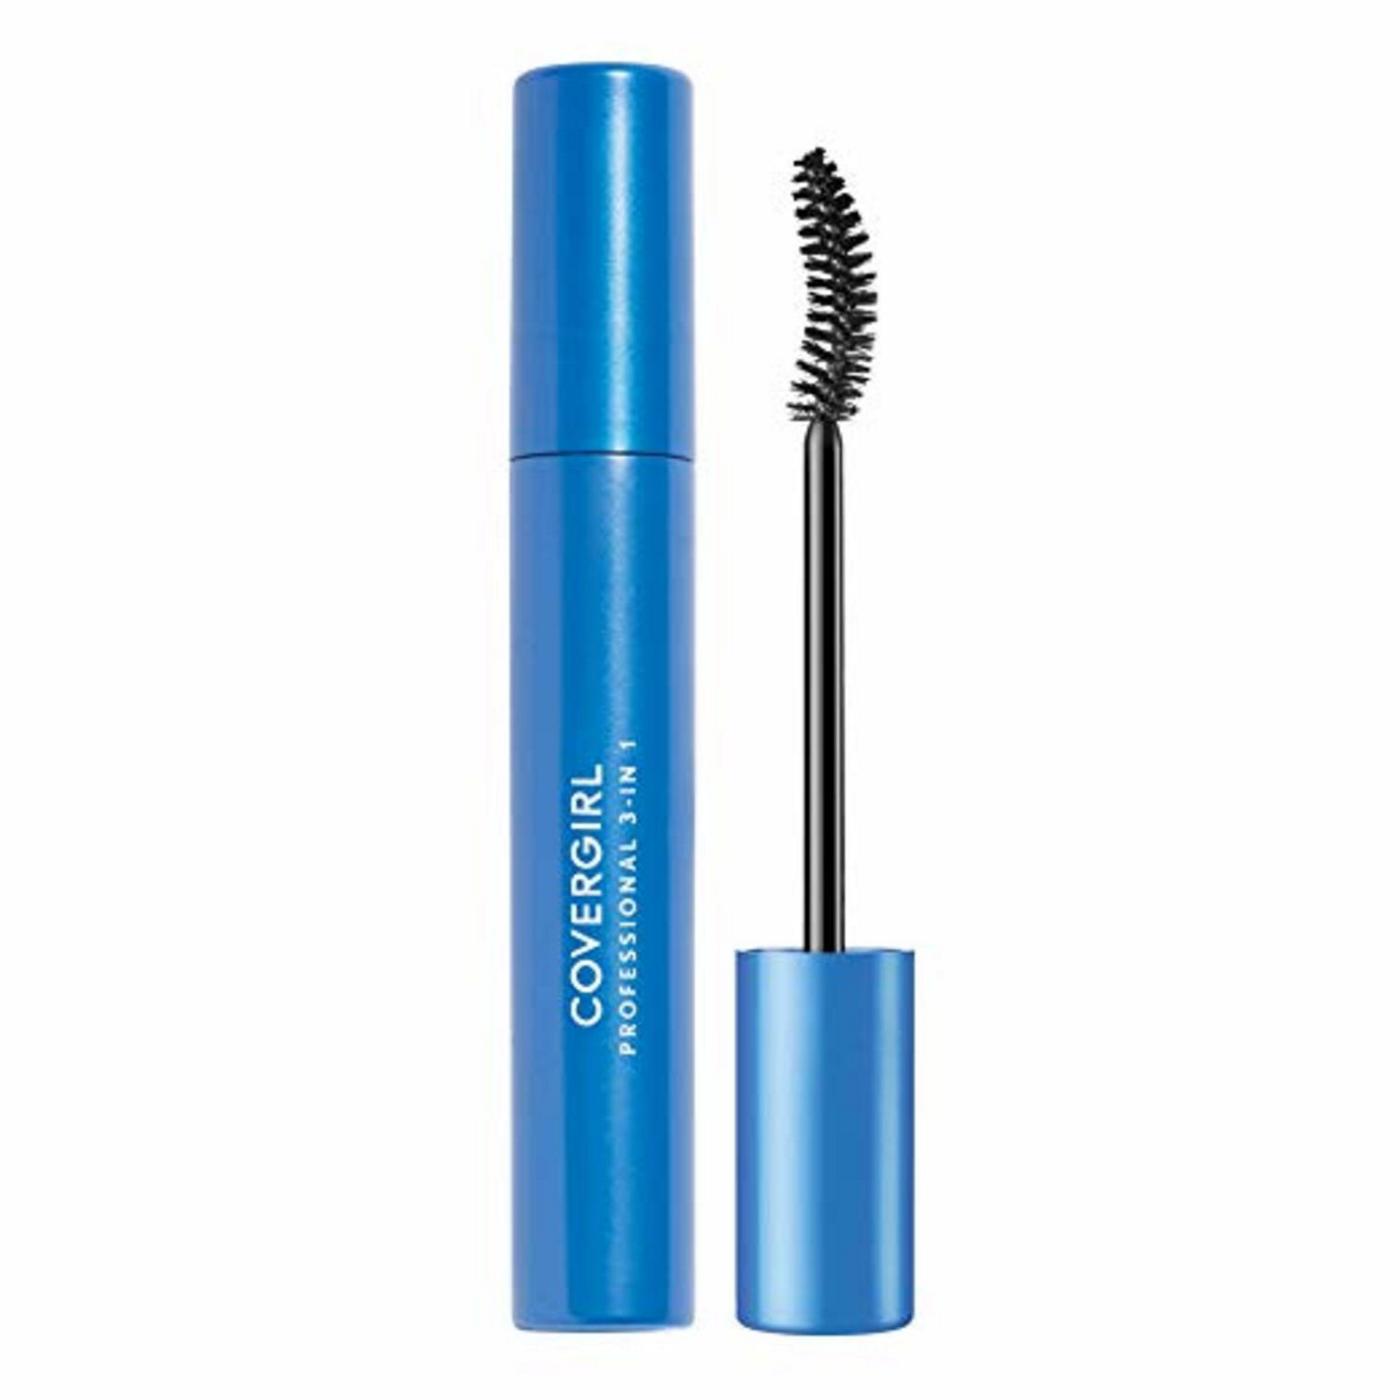 Covergirl Professional 3-in-1 Curved Brush Mascara 205 Black; image 3 of 4